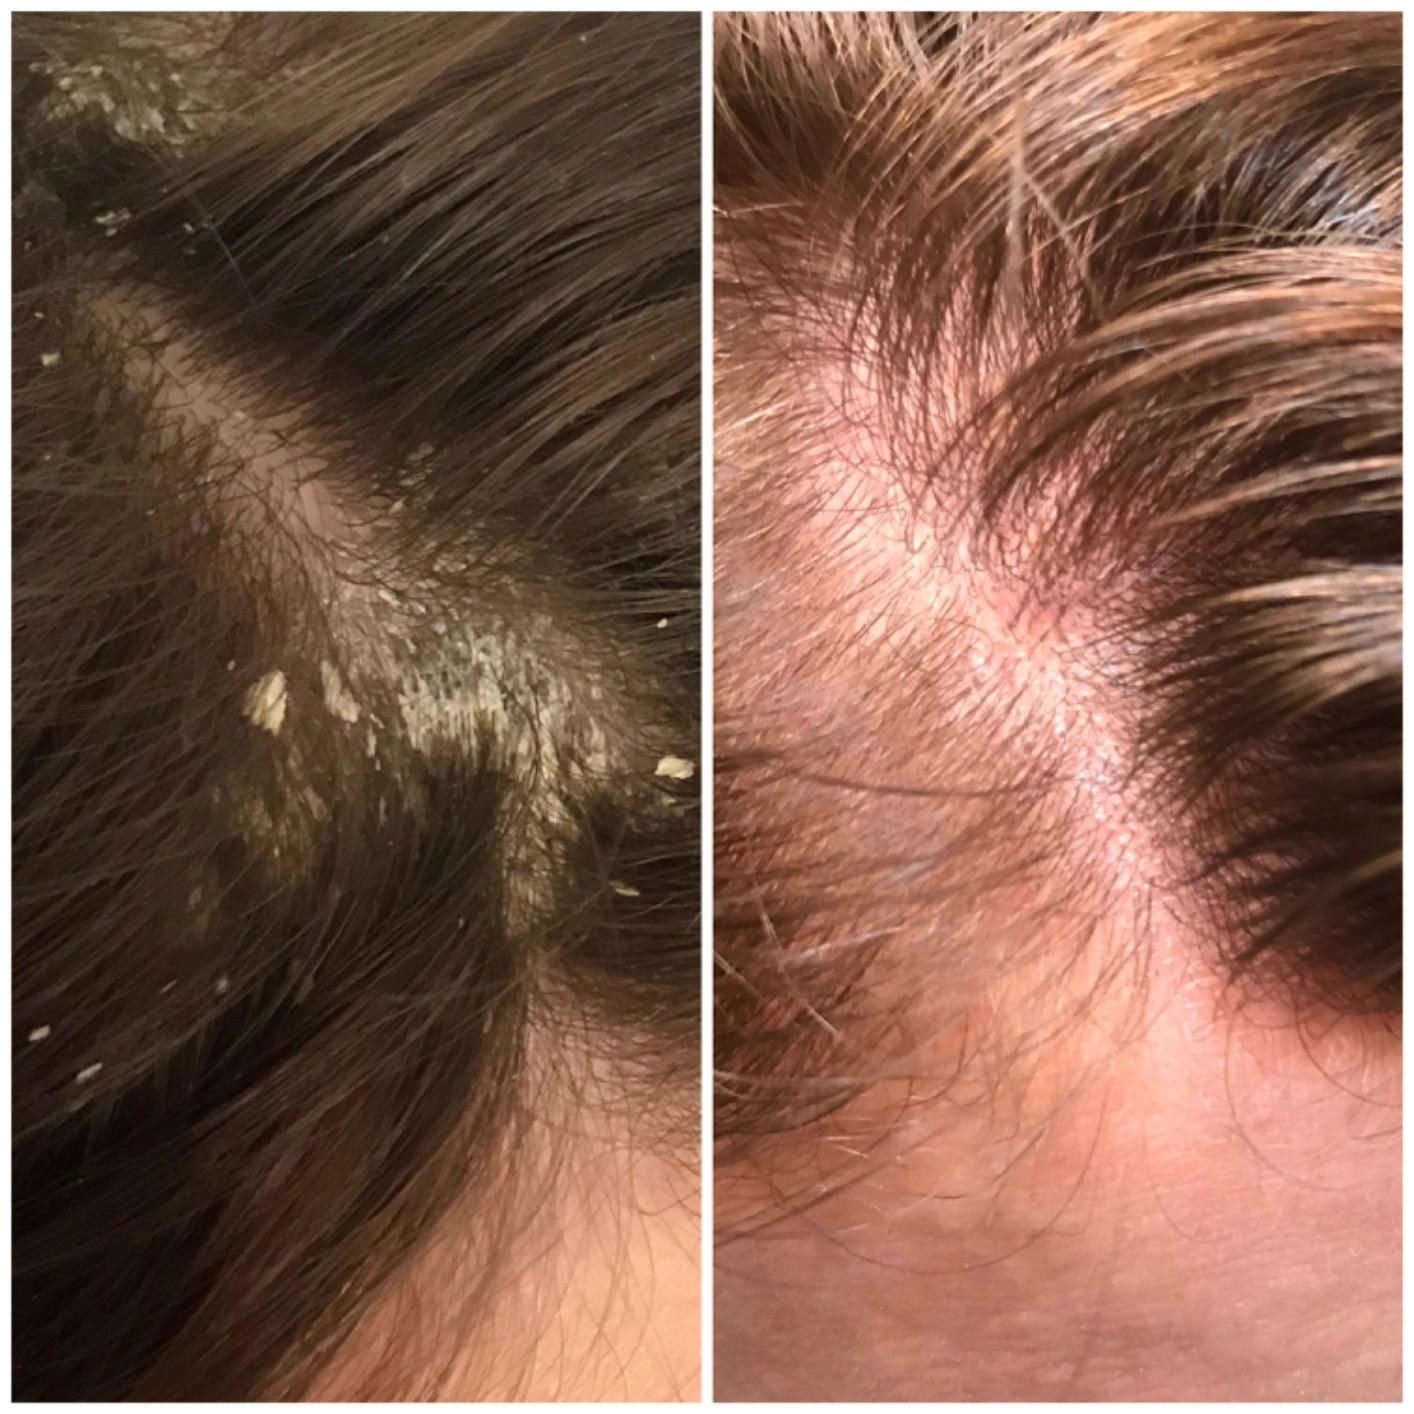 Reviewer's before and after photos showing the shampoo got rid of their significant dandruff